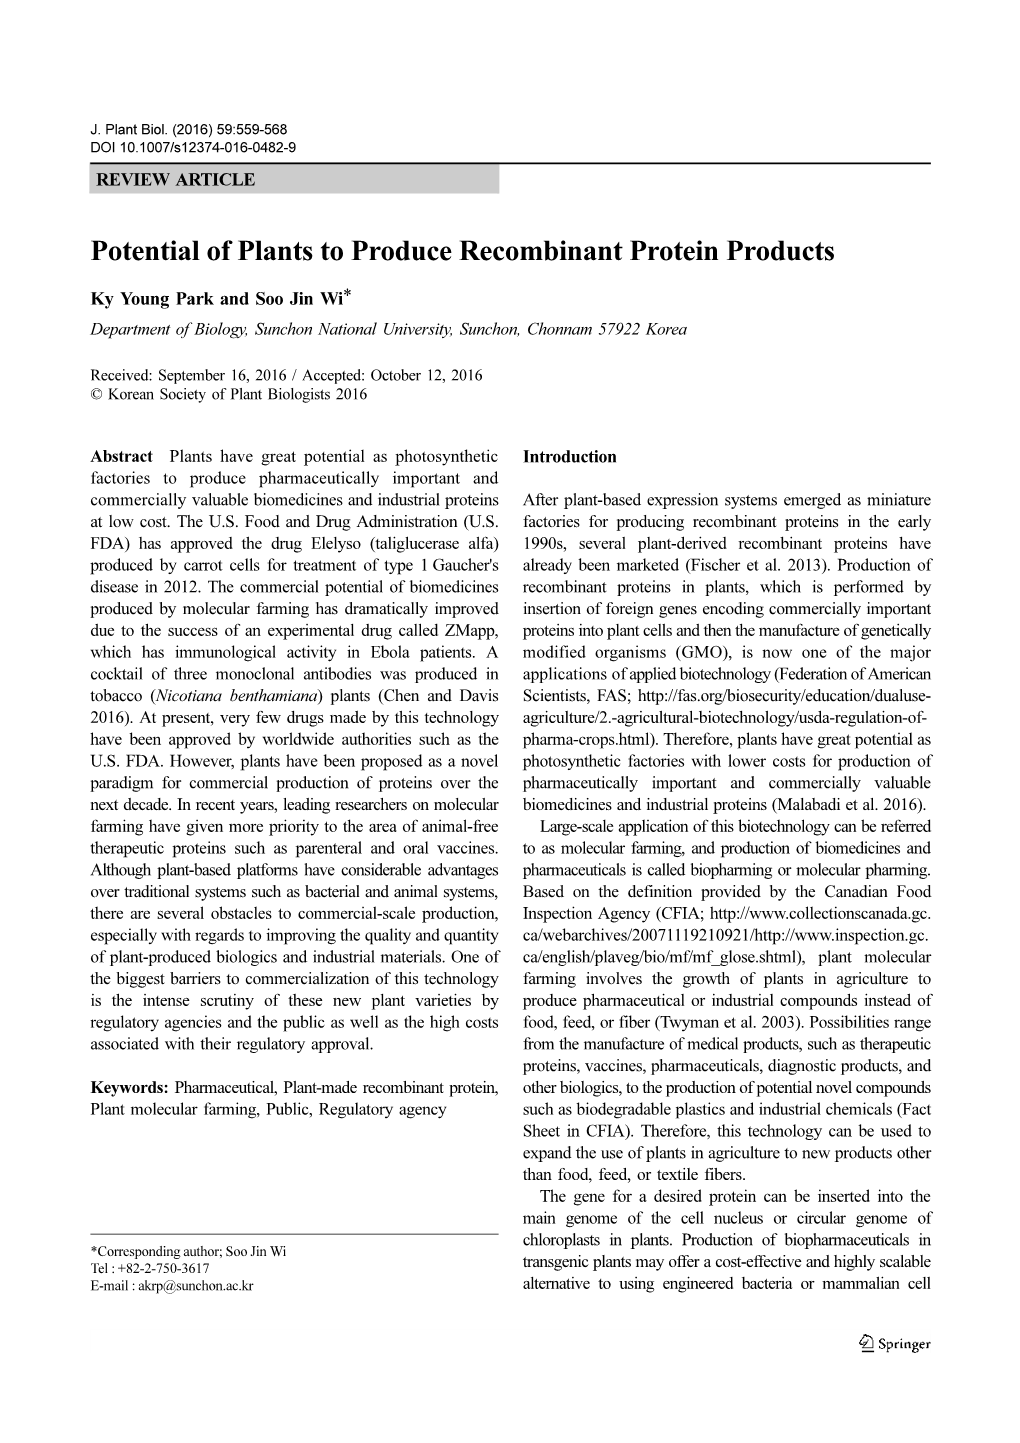 Potential of Plants to Produce Recombinant Protein Products